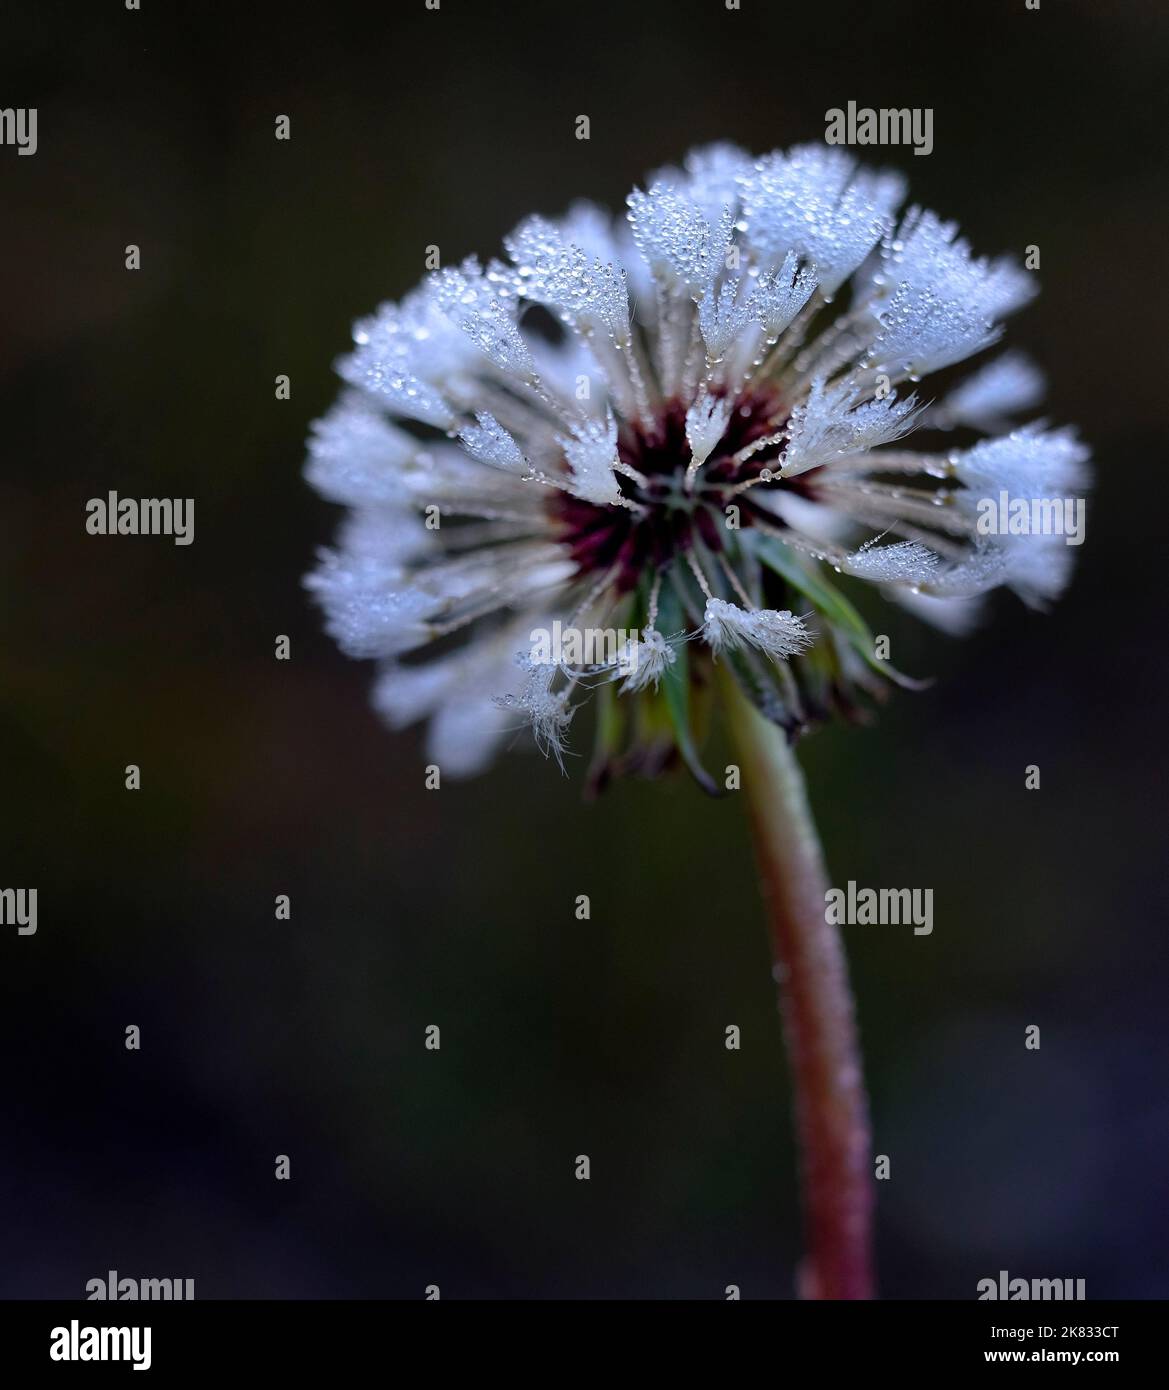 Dandylion closeup with dew drops frozen on seeds ice crystals Stock Photo